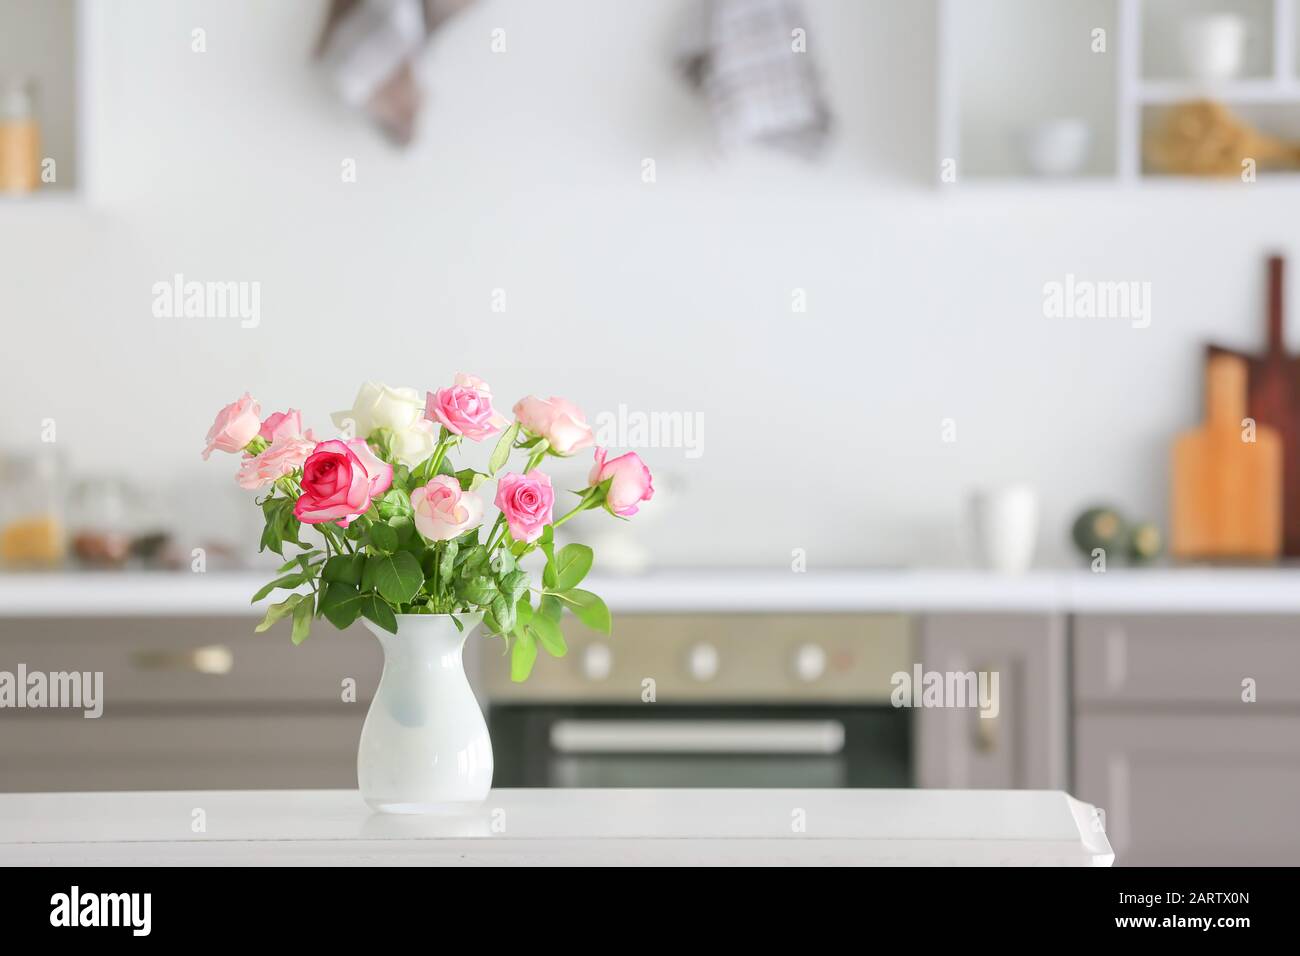 Beautiful rose flowers in vase on table in kitchen Stock Photo